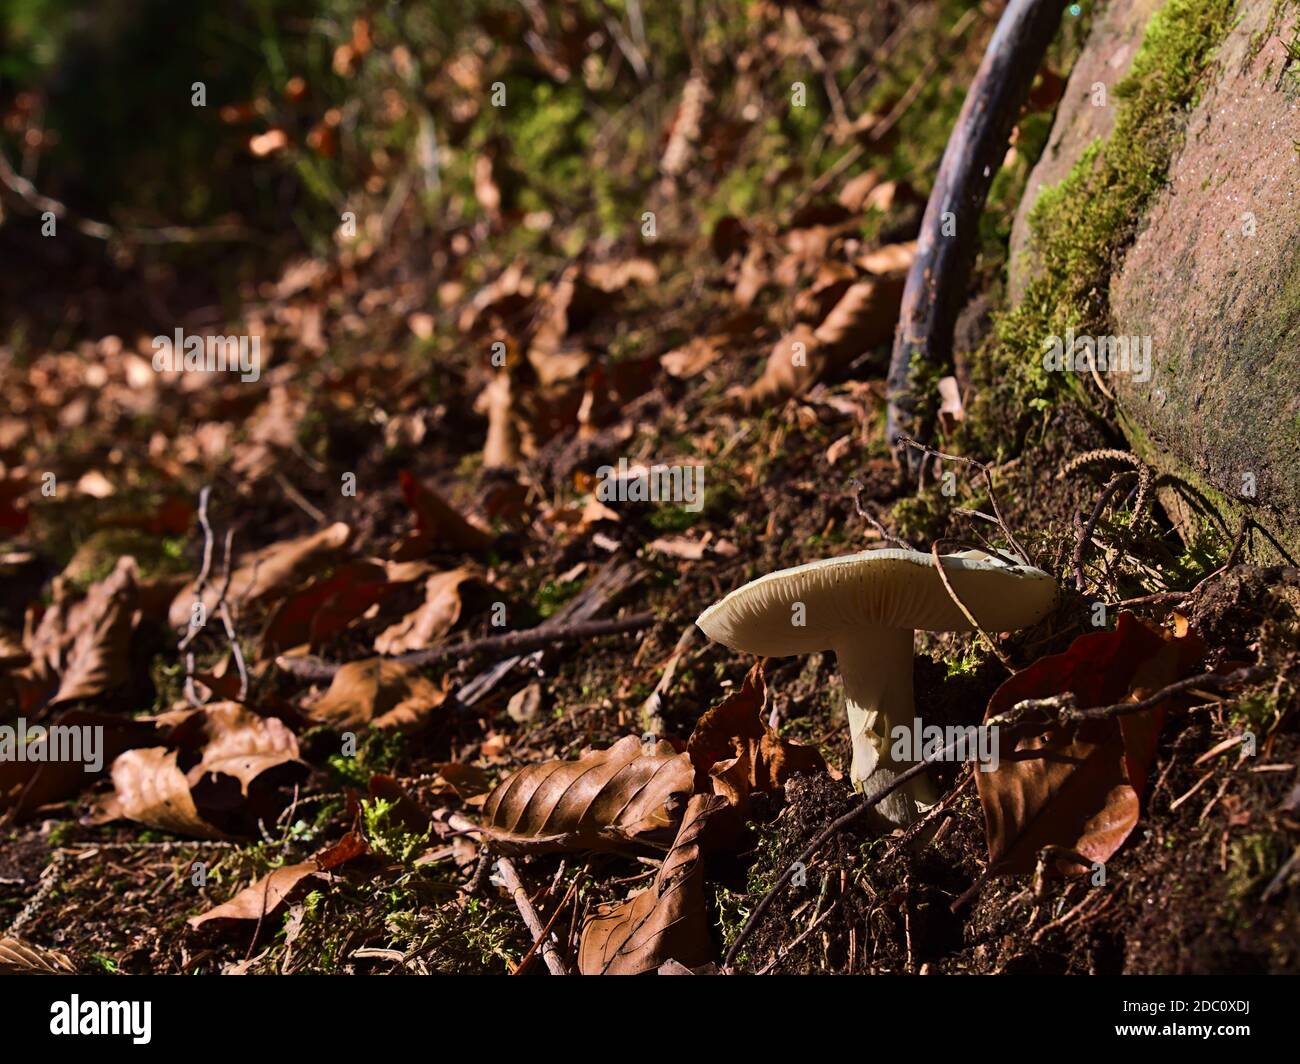 Close-up view of lonely white mushroom growing at the side of a hiking trail covered with foliage of brown colored leaves in Black Forest, Germany. Stock Photo